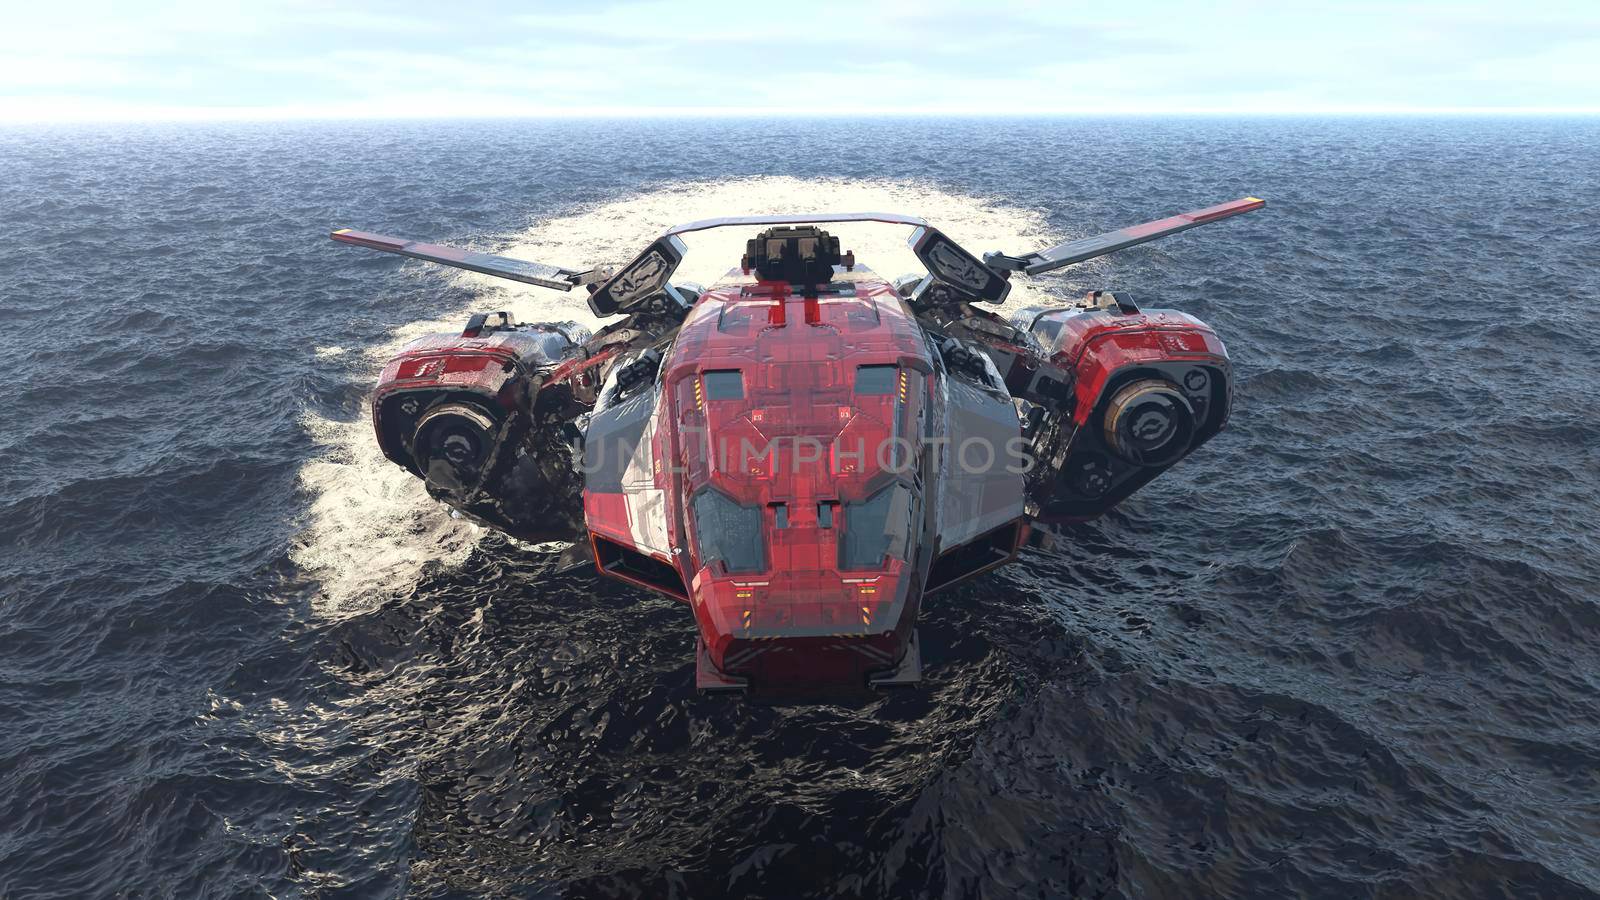 The spacecraft takes off from under the water and flies over the surface of the ocean. Concept for fantasy, futuristic or space travel backgrounds. 3D Rendering by designprojects